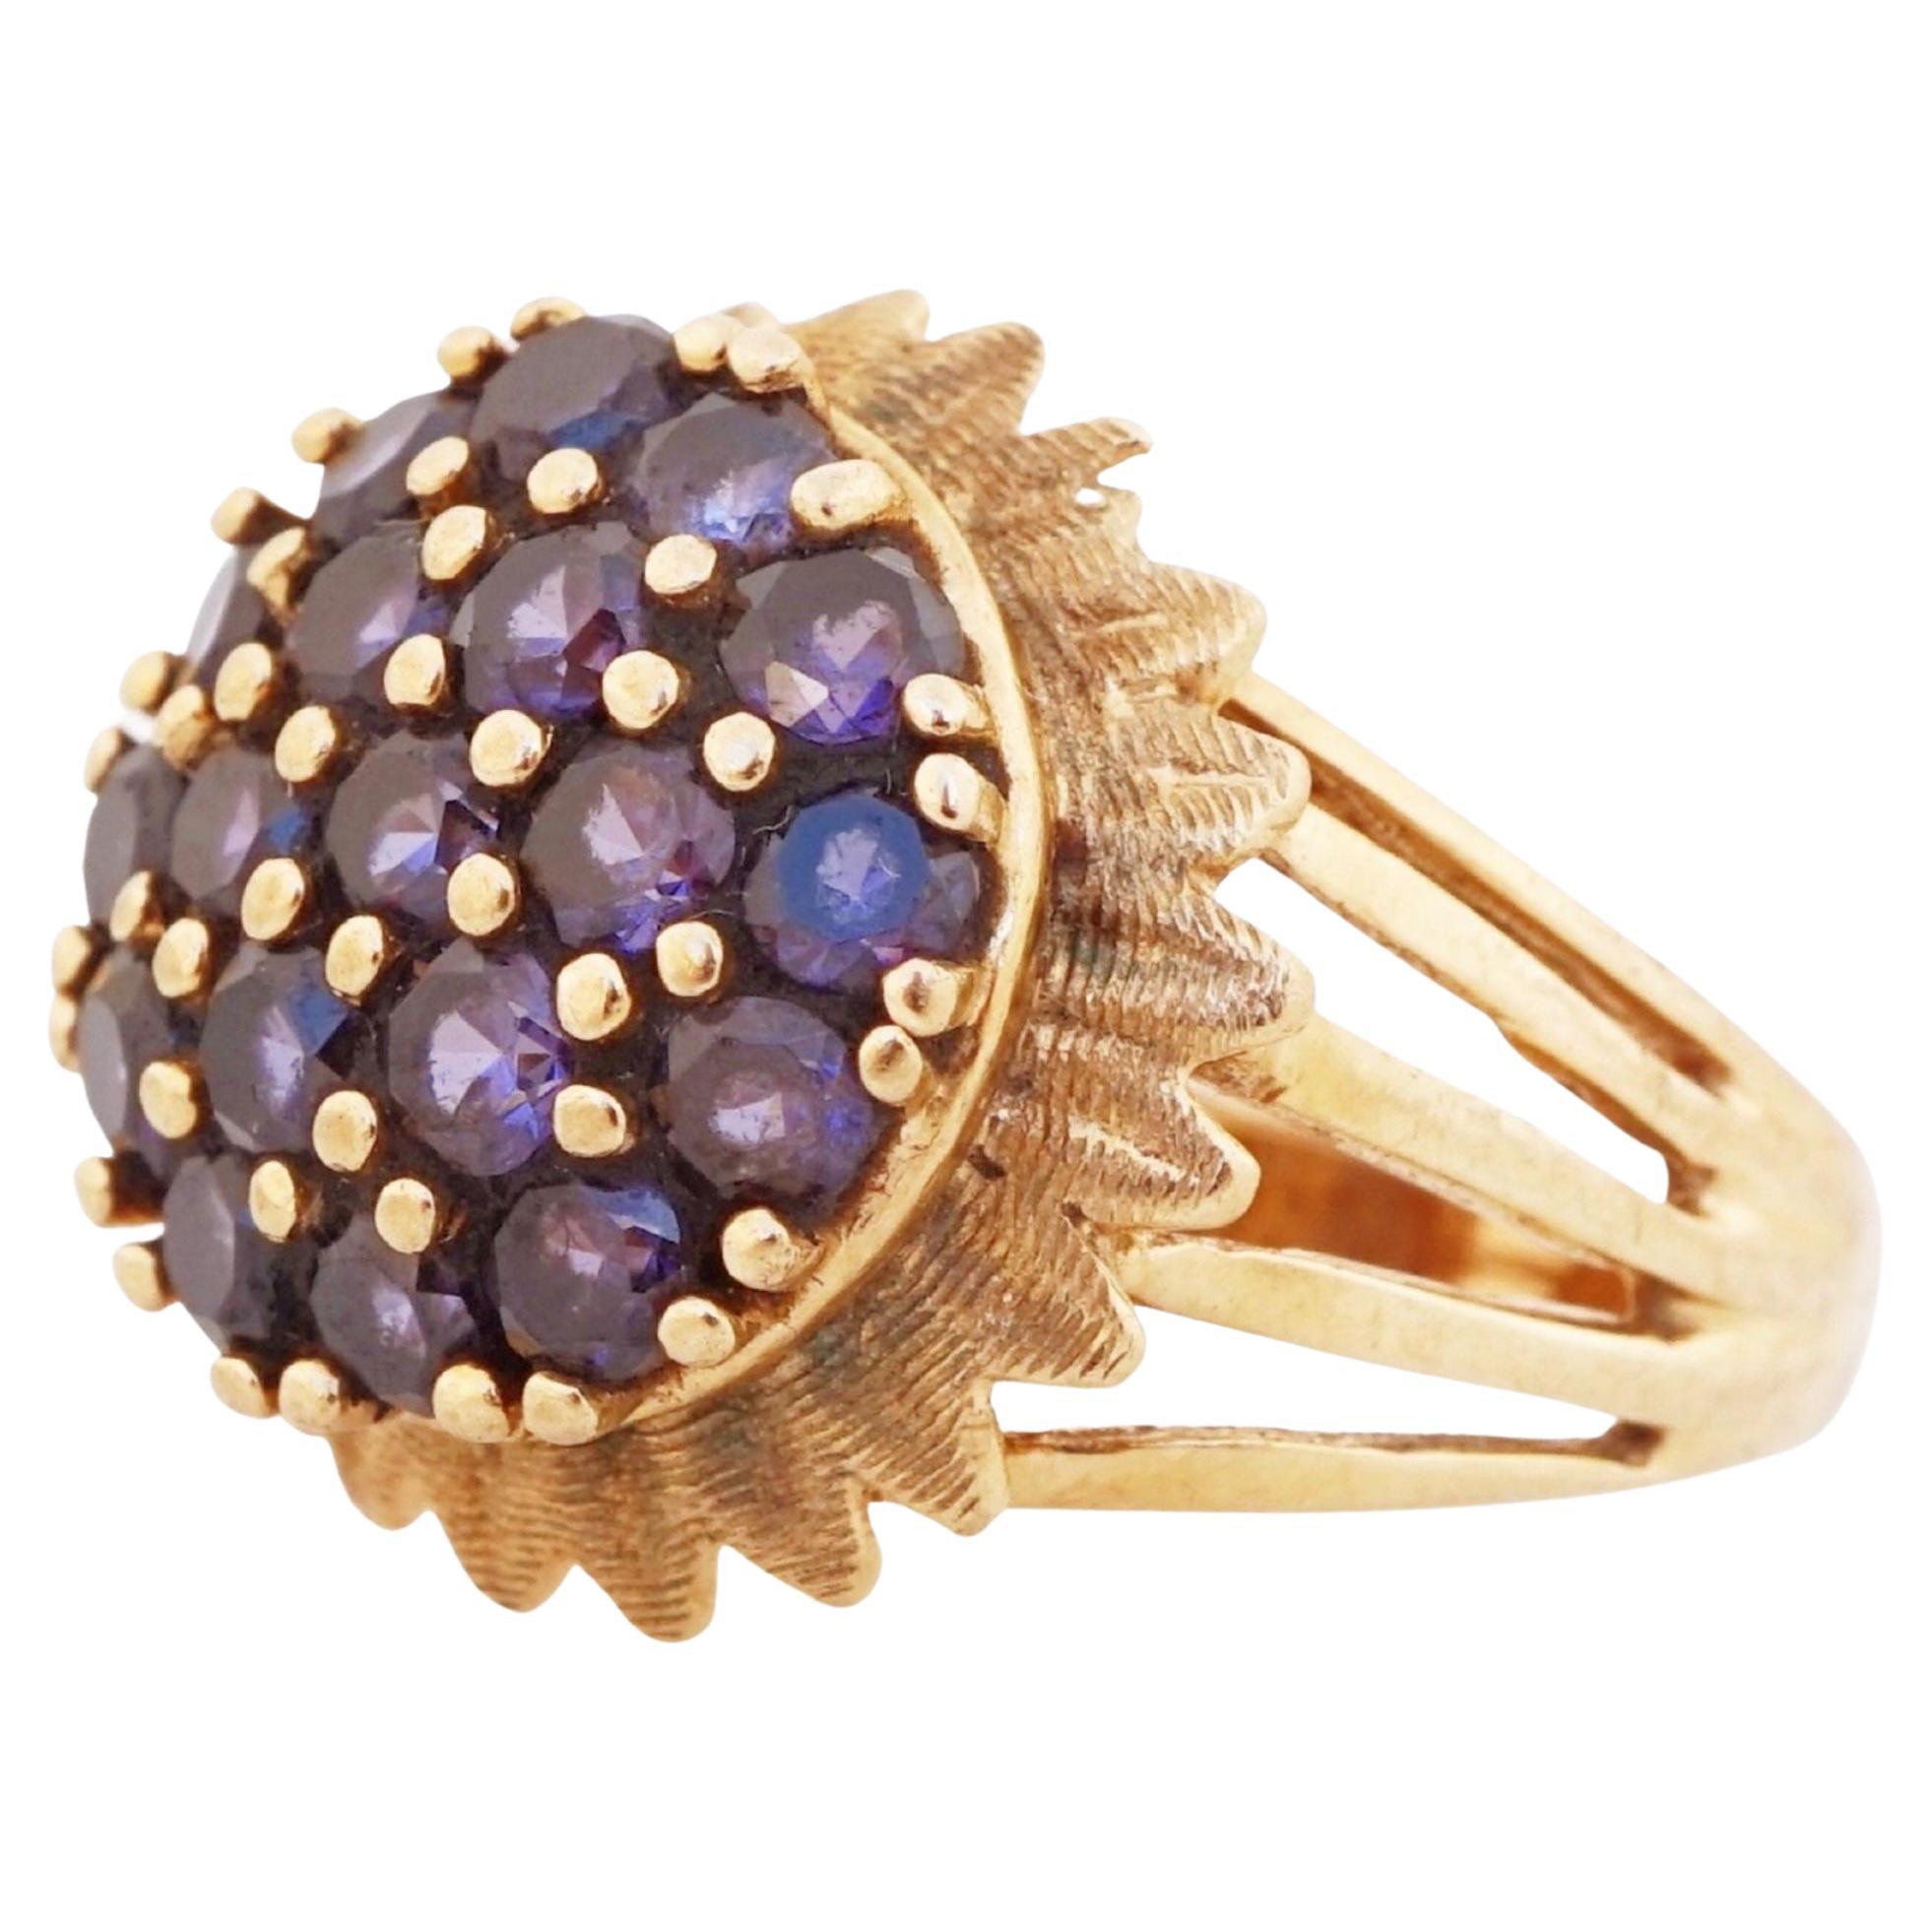 10k Gold Floral Ring with Sapphire Gemstones, 1970s For Sale